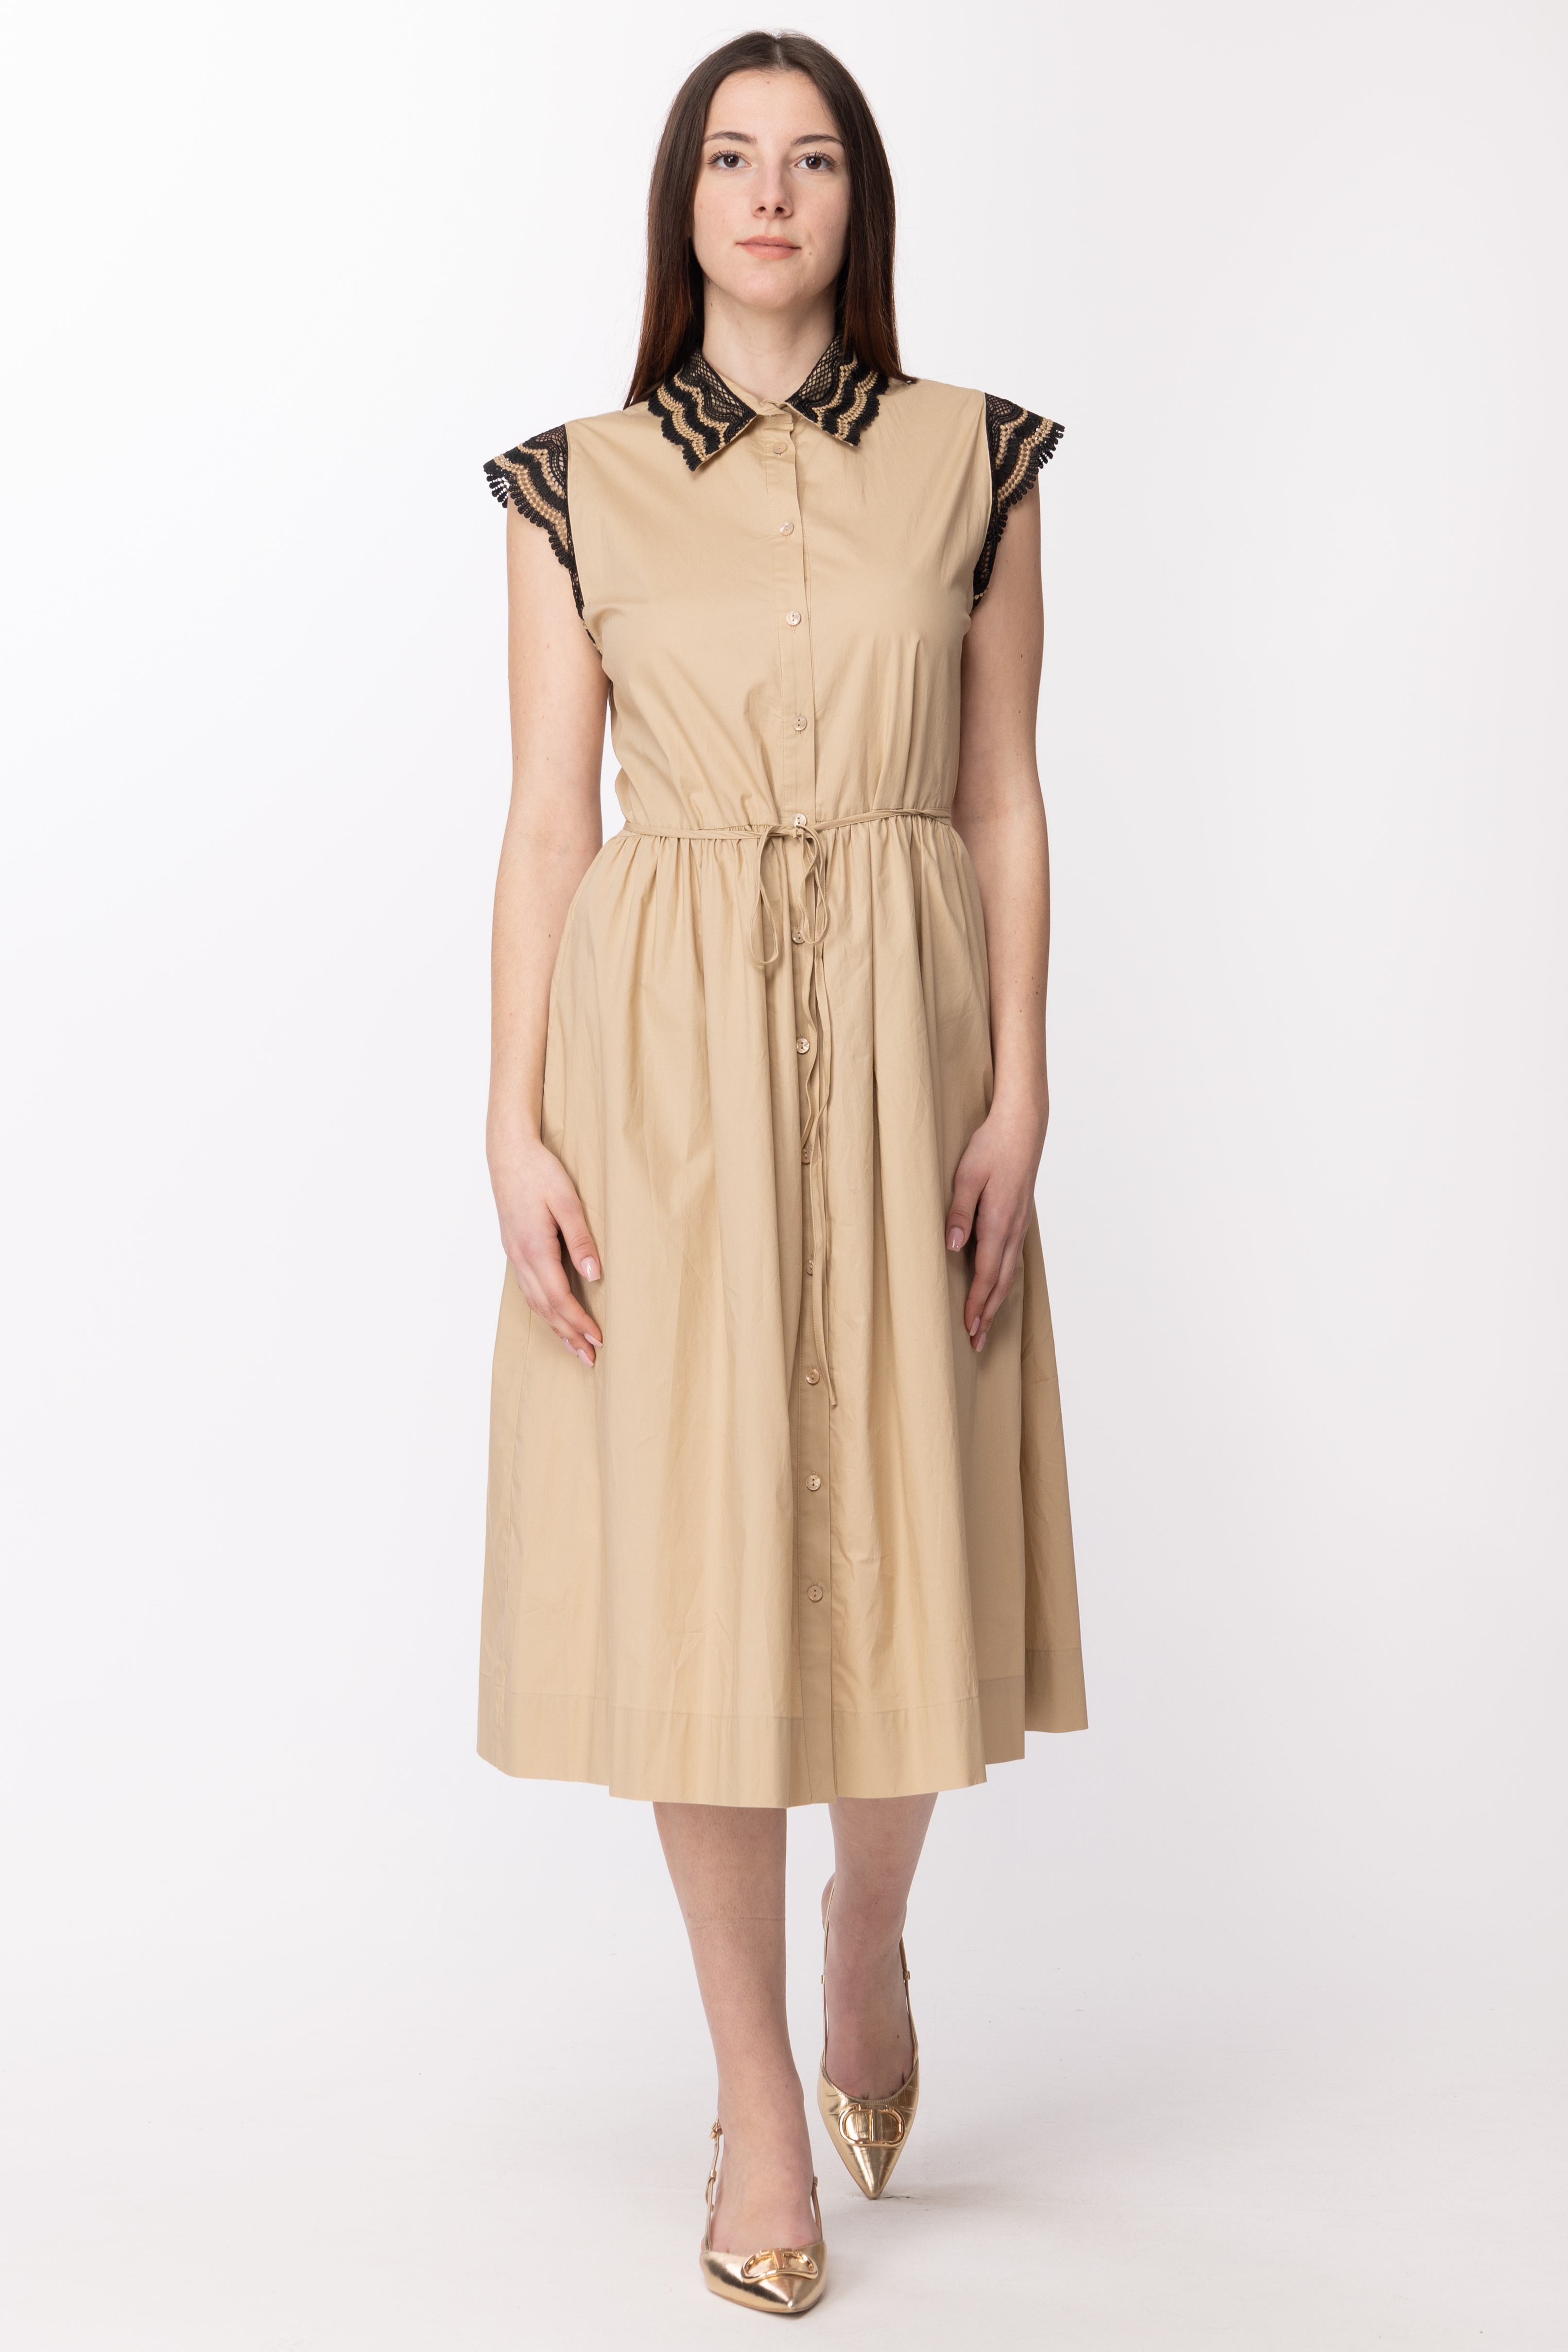 Preview: Twin-Set Chemisier dress with lace details RIC BEIGE/NERO